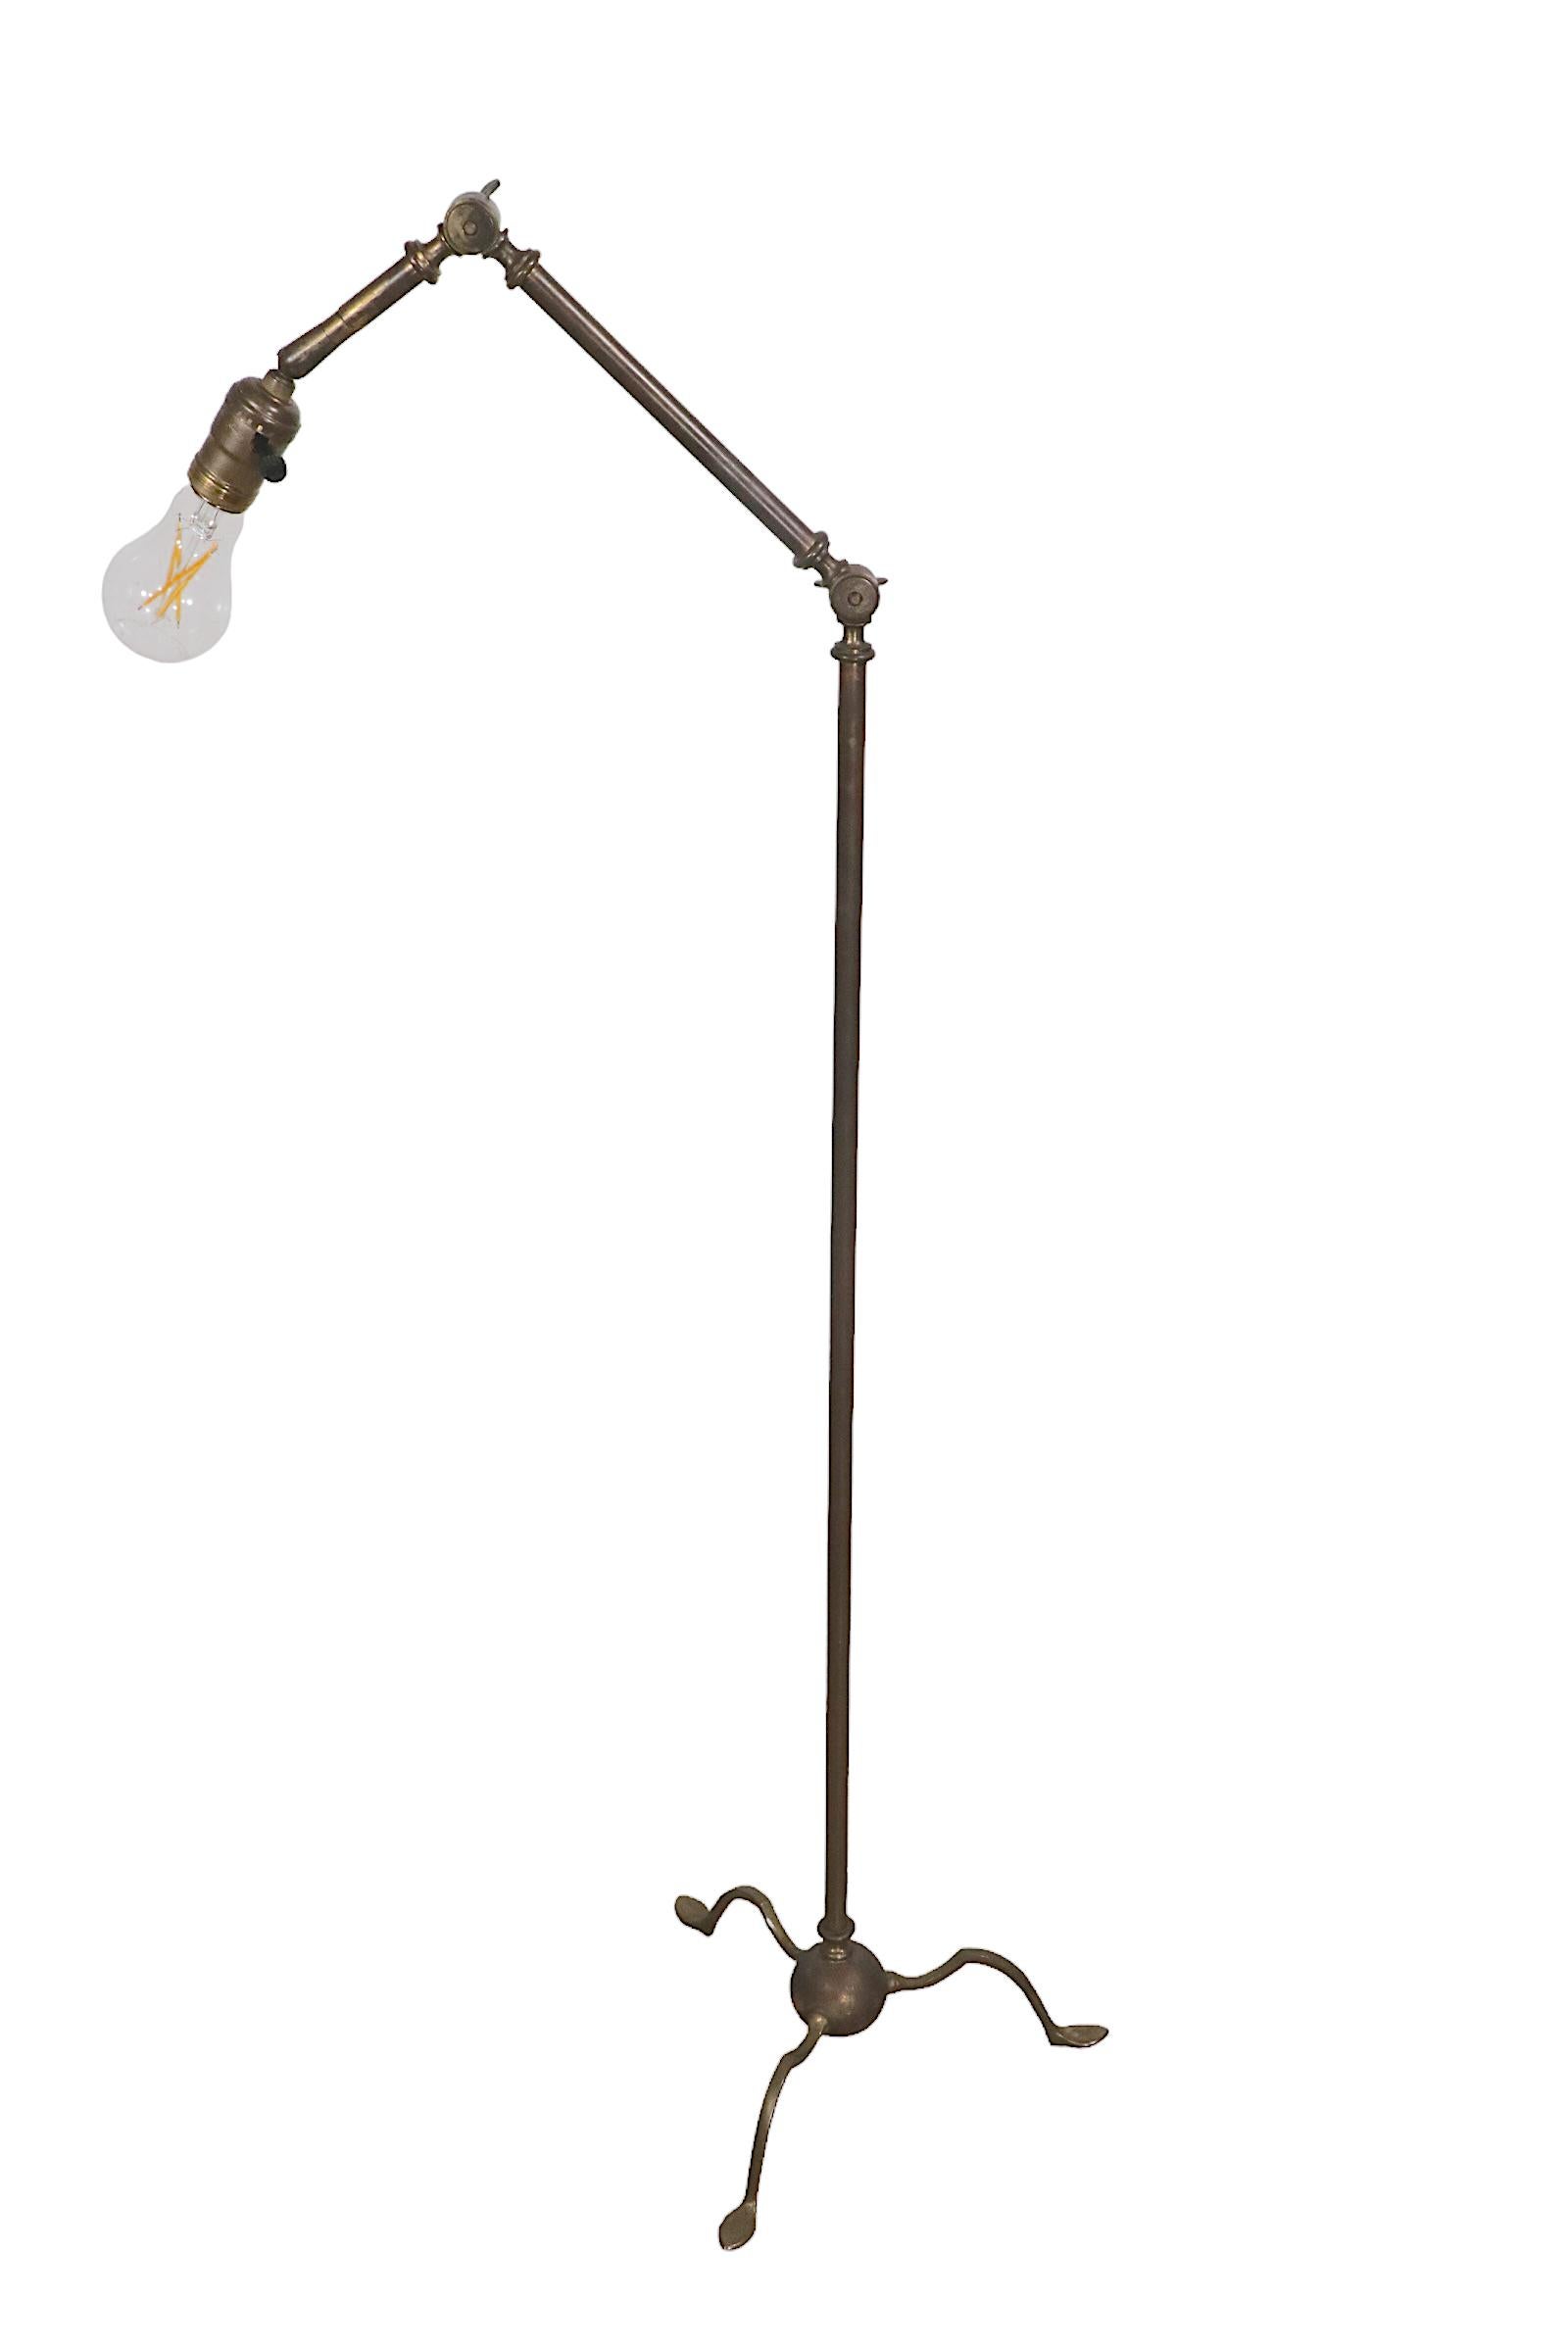 Articulating Brass Reading Floor Lamp in the Classical Style, C. 1900- 1930's For Sale 12